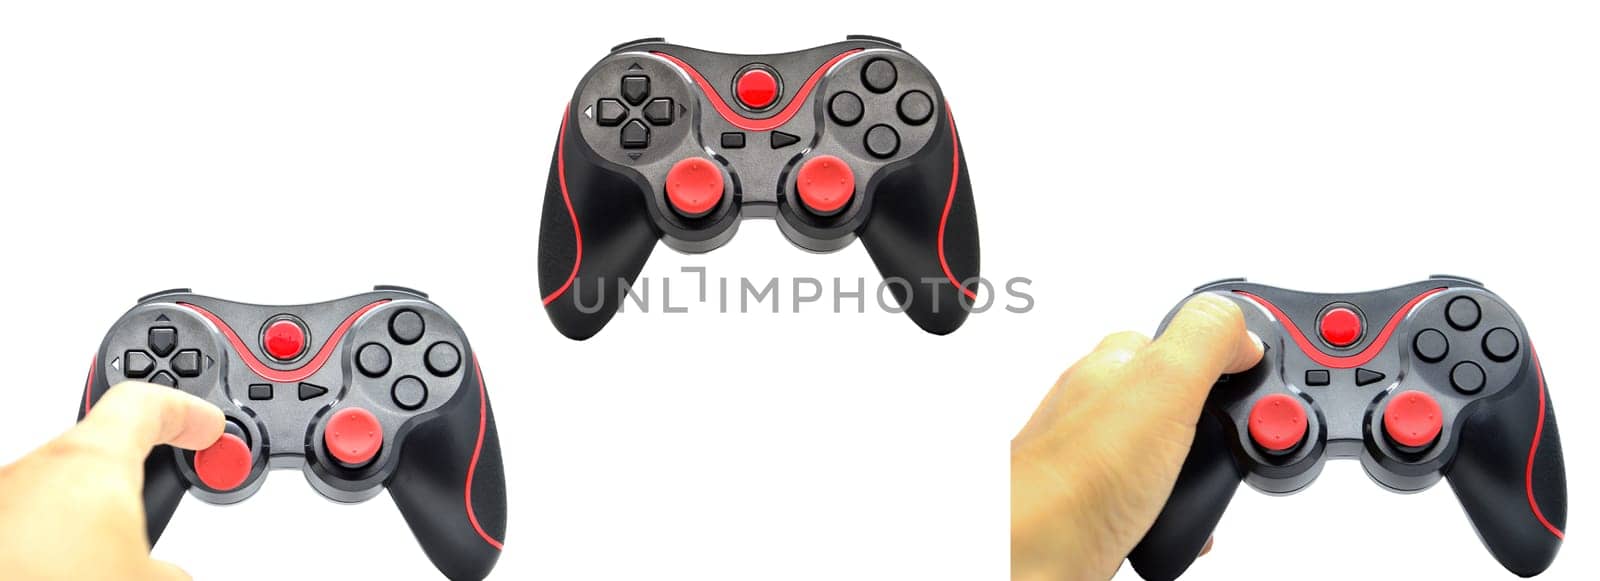 Joystick for gaming (with clipping path)